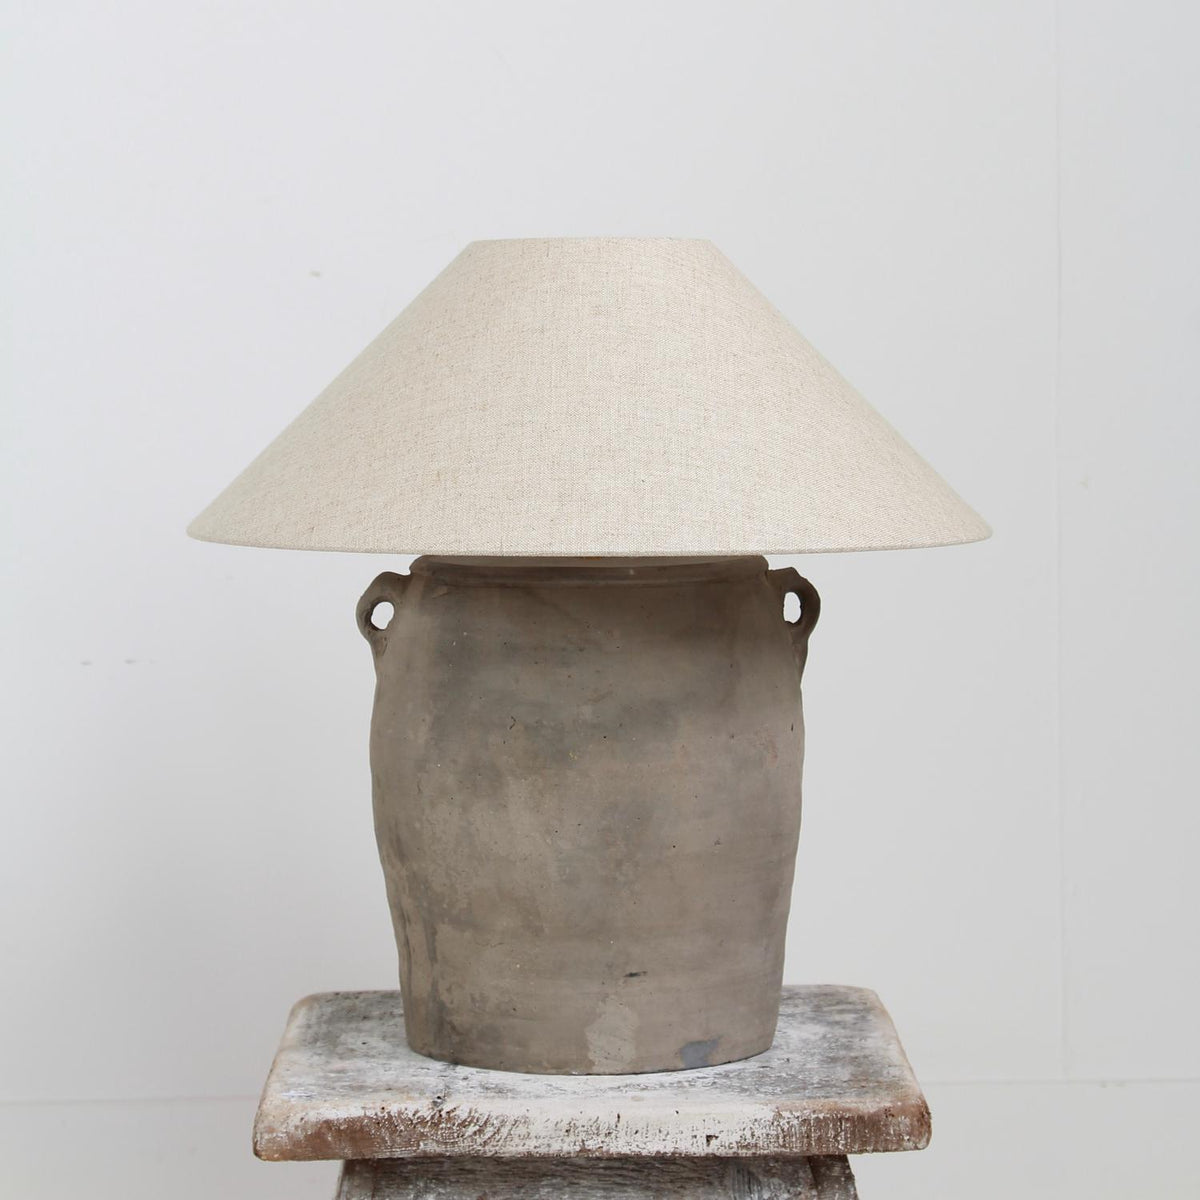 RUSTIC CHINESE TERRACOTTA TABLE LAMP WITH NATURAL LINEN SHADE